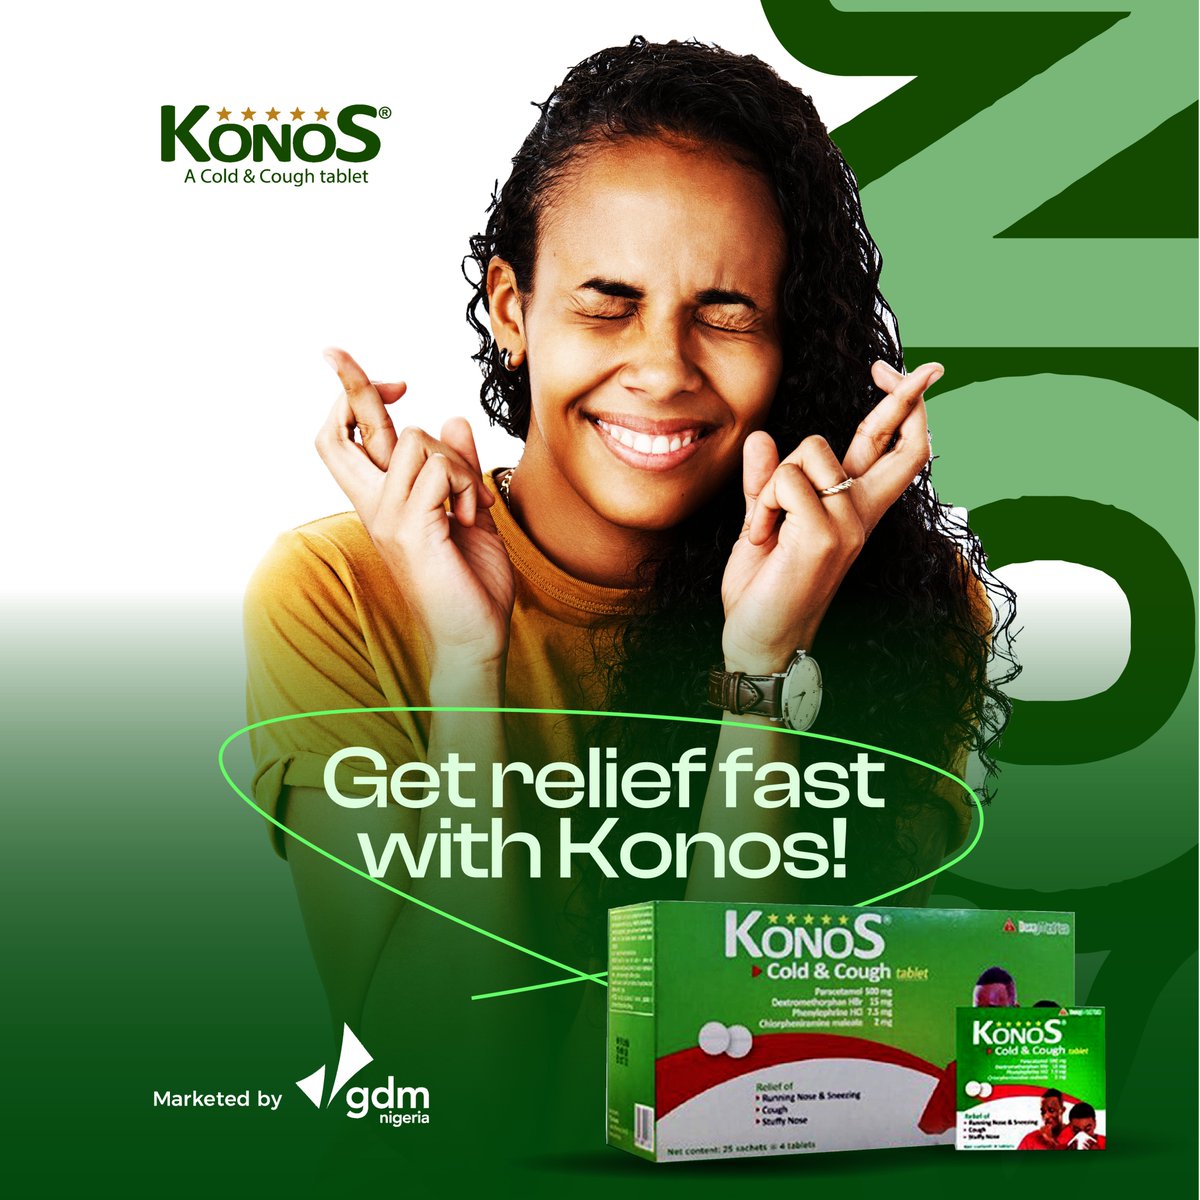 Wave goodbye to colds and coughs and say hello to your plans this weekend! With Konos, get faster relief and take back your days! ✨💪

#BreatheEasy #Konos #coldremedy #coldrelief